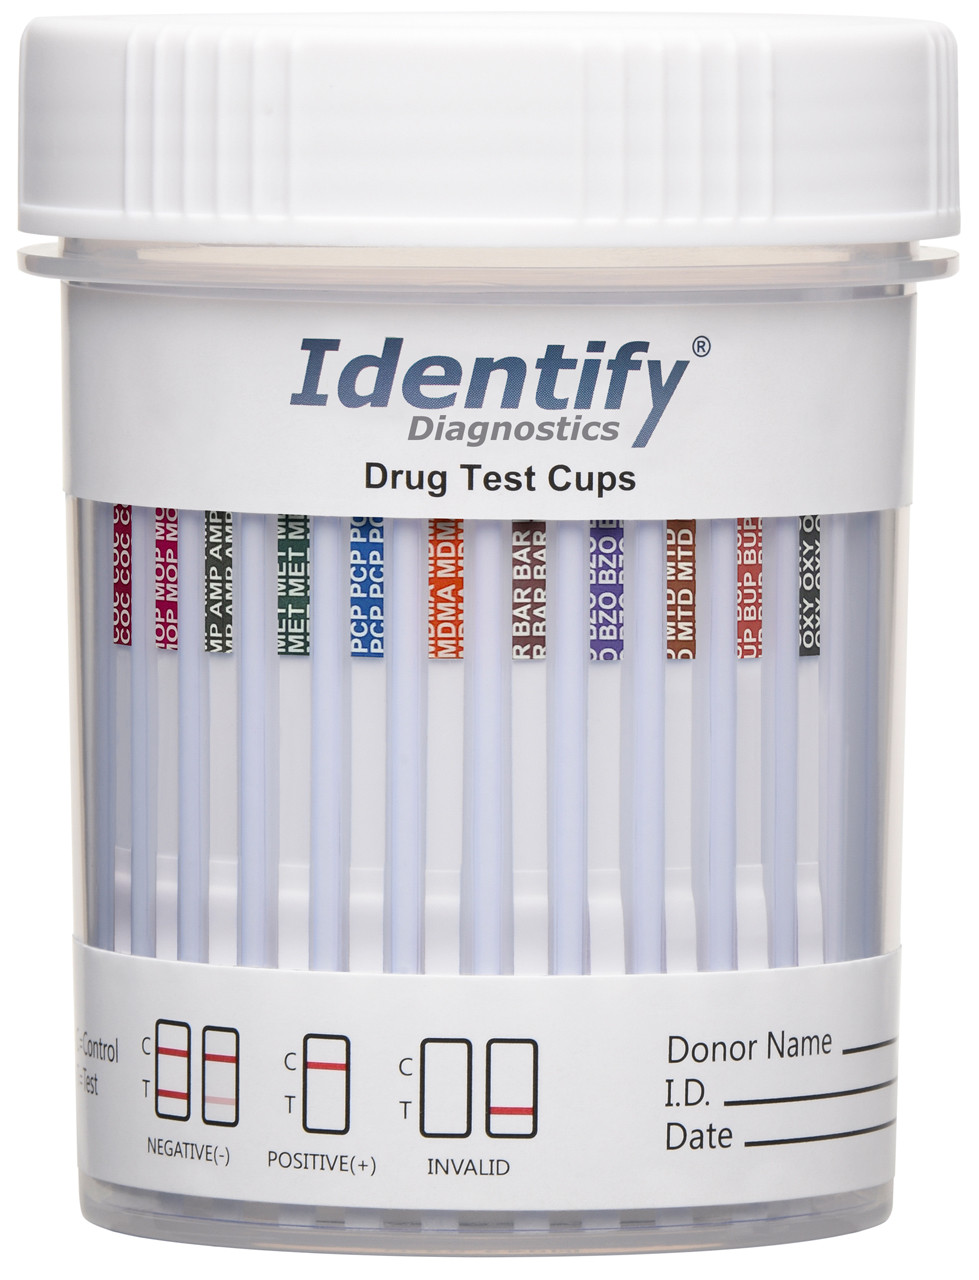 Where to Get a 12 Panel Drug Test?